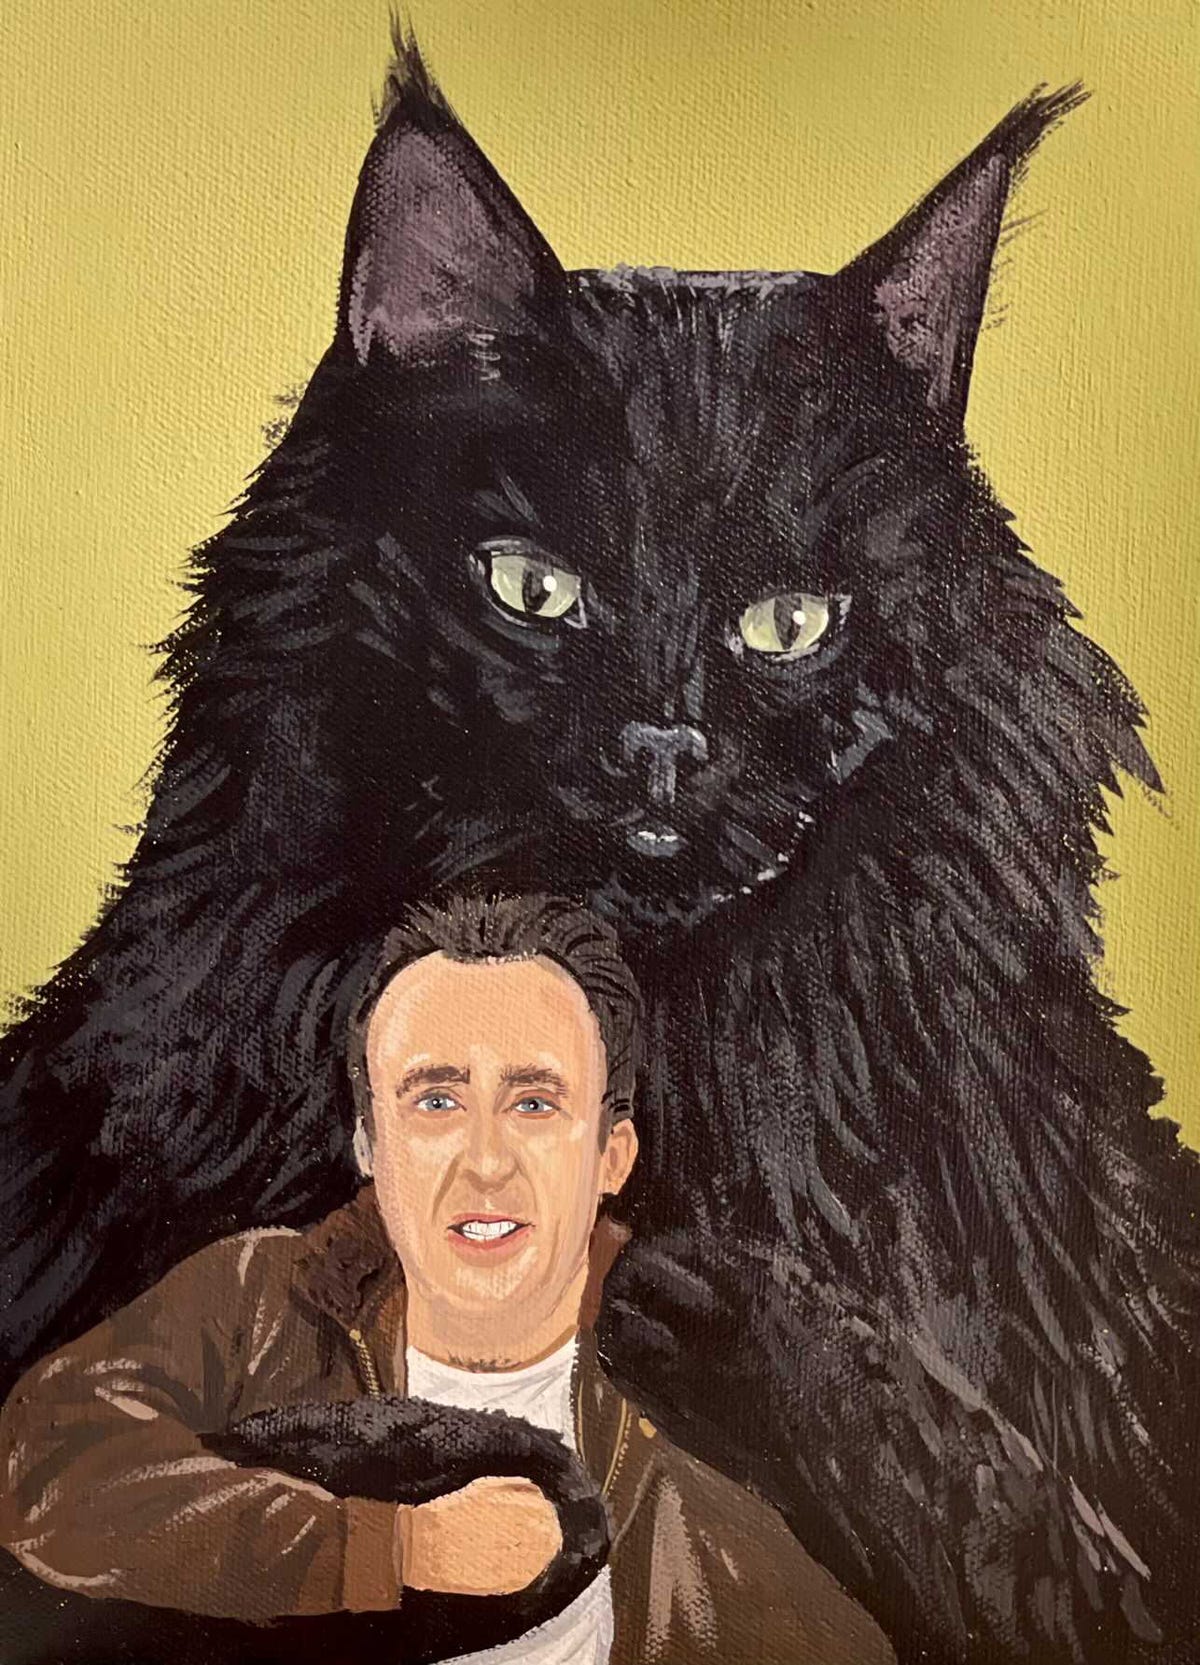 Nicolas Cage loves his cat.  The internet was made for this moment